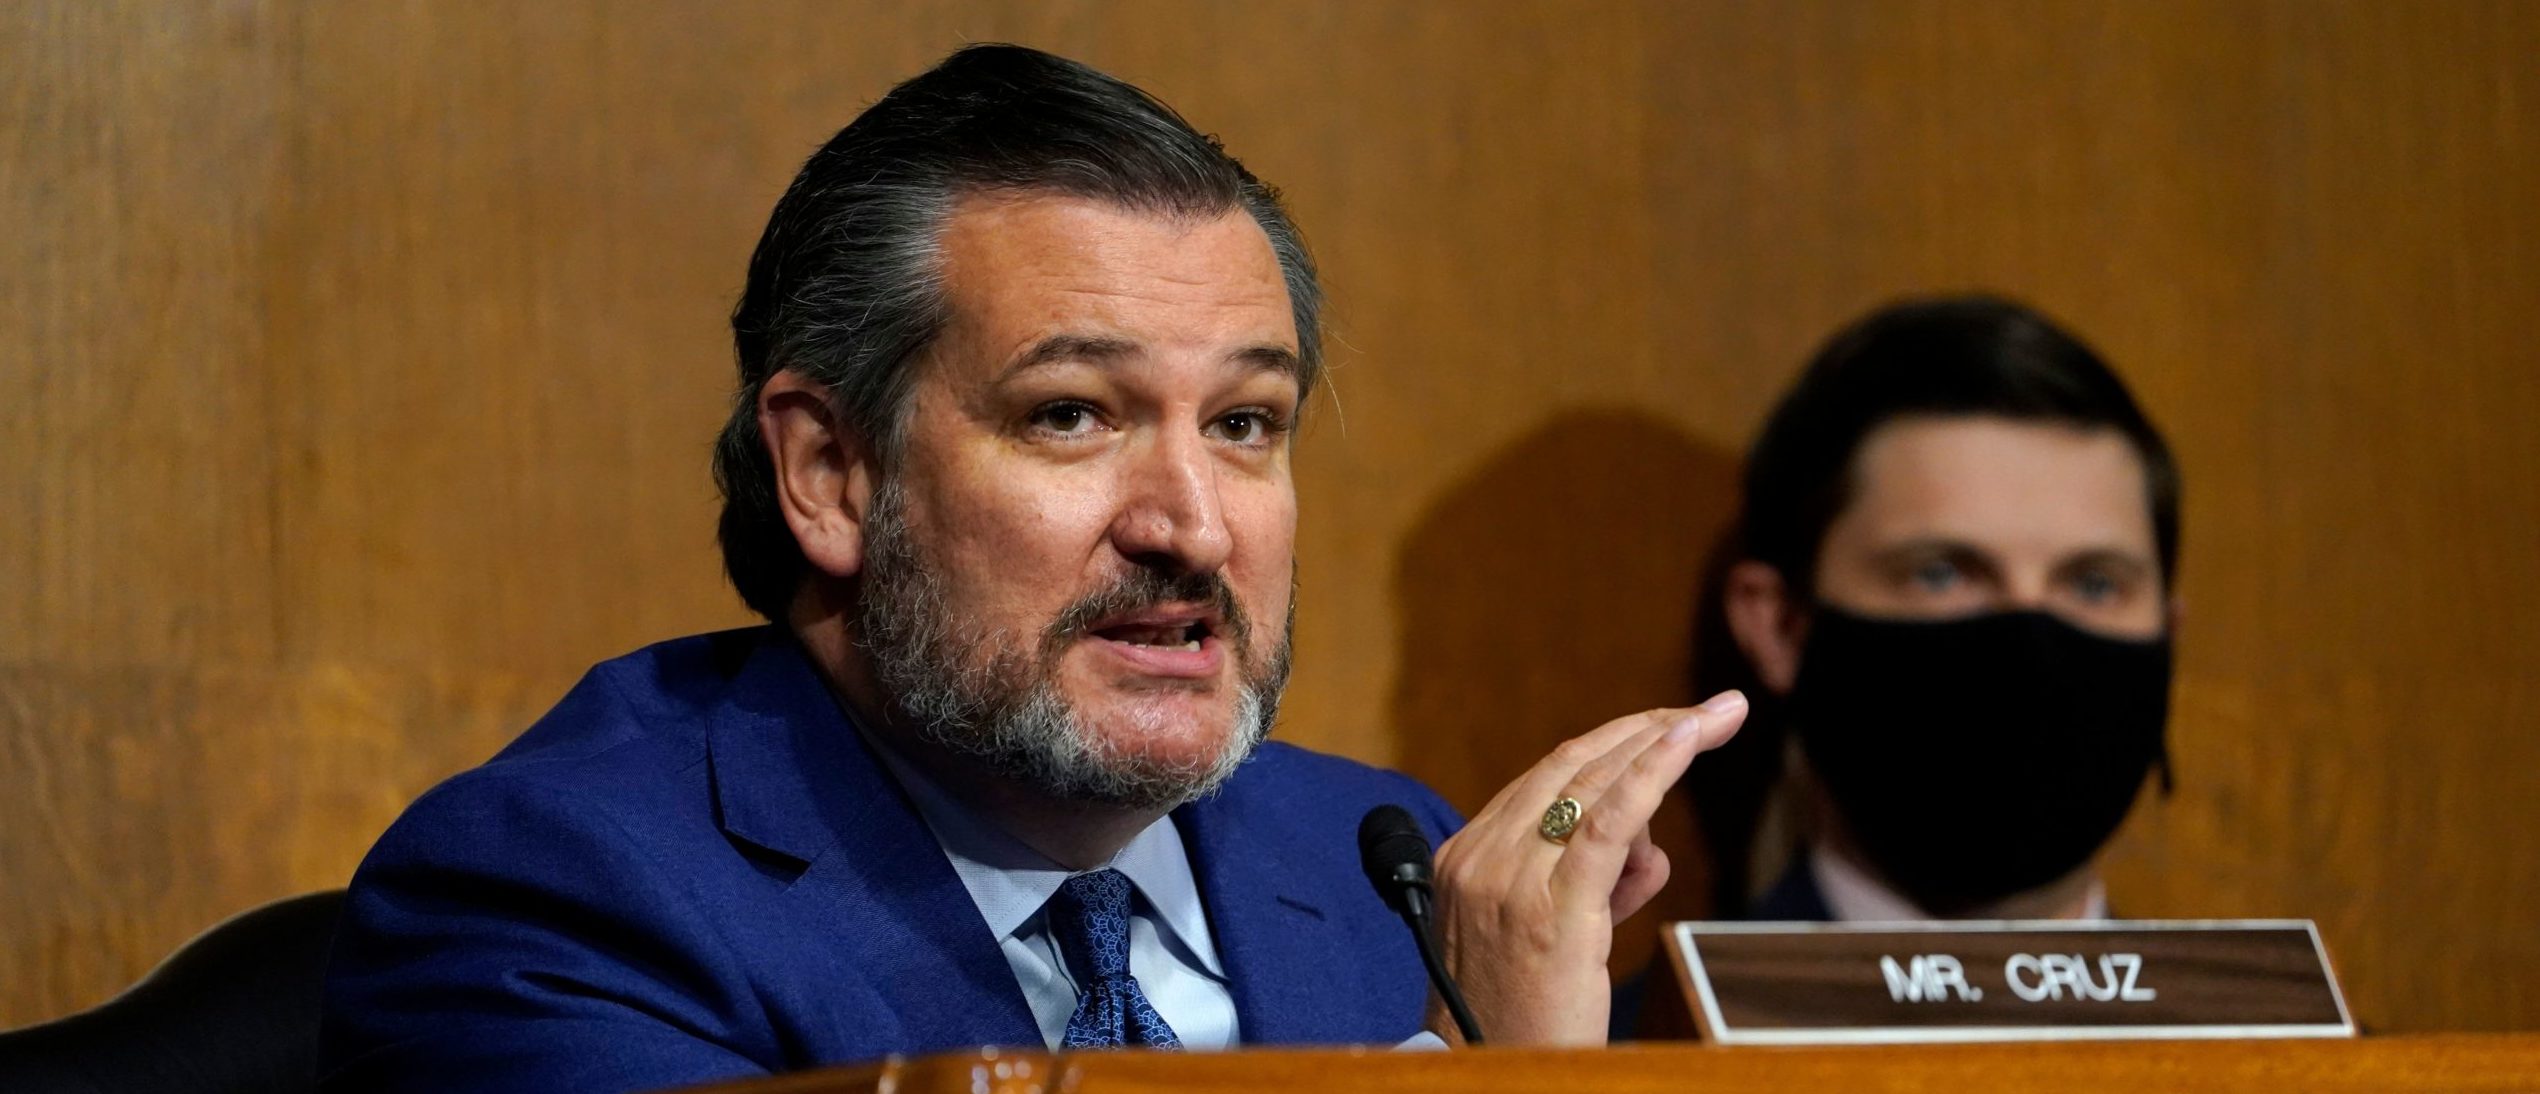 Sen. Ted Cruz, R-TX speaks during a Senate Judiciary Committee hearing on a probe of the FBIs Russia investigation on Capitol Hill in Washington, DC on November 10, 2020. (Photo by Susan Walsh / POOL / AFP) (Photo by SUSAN WALSH/POOL/AFP via Getty Images)